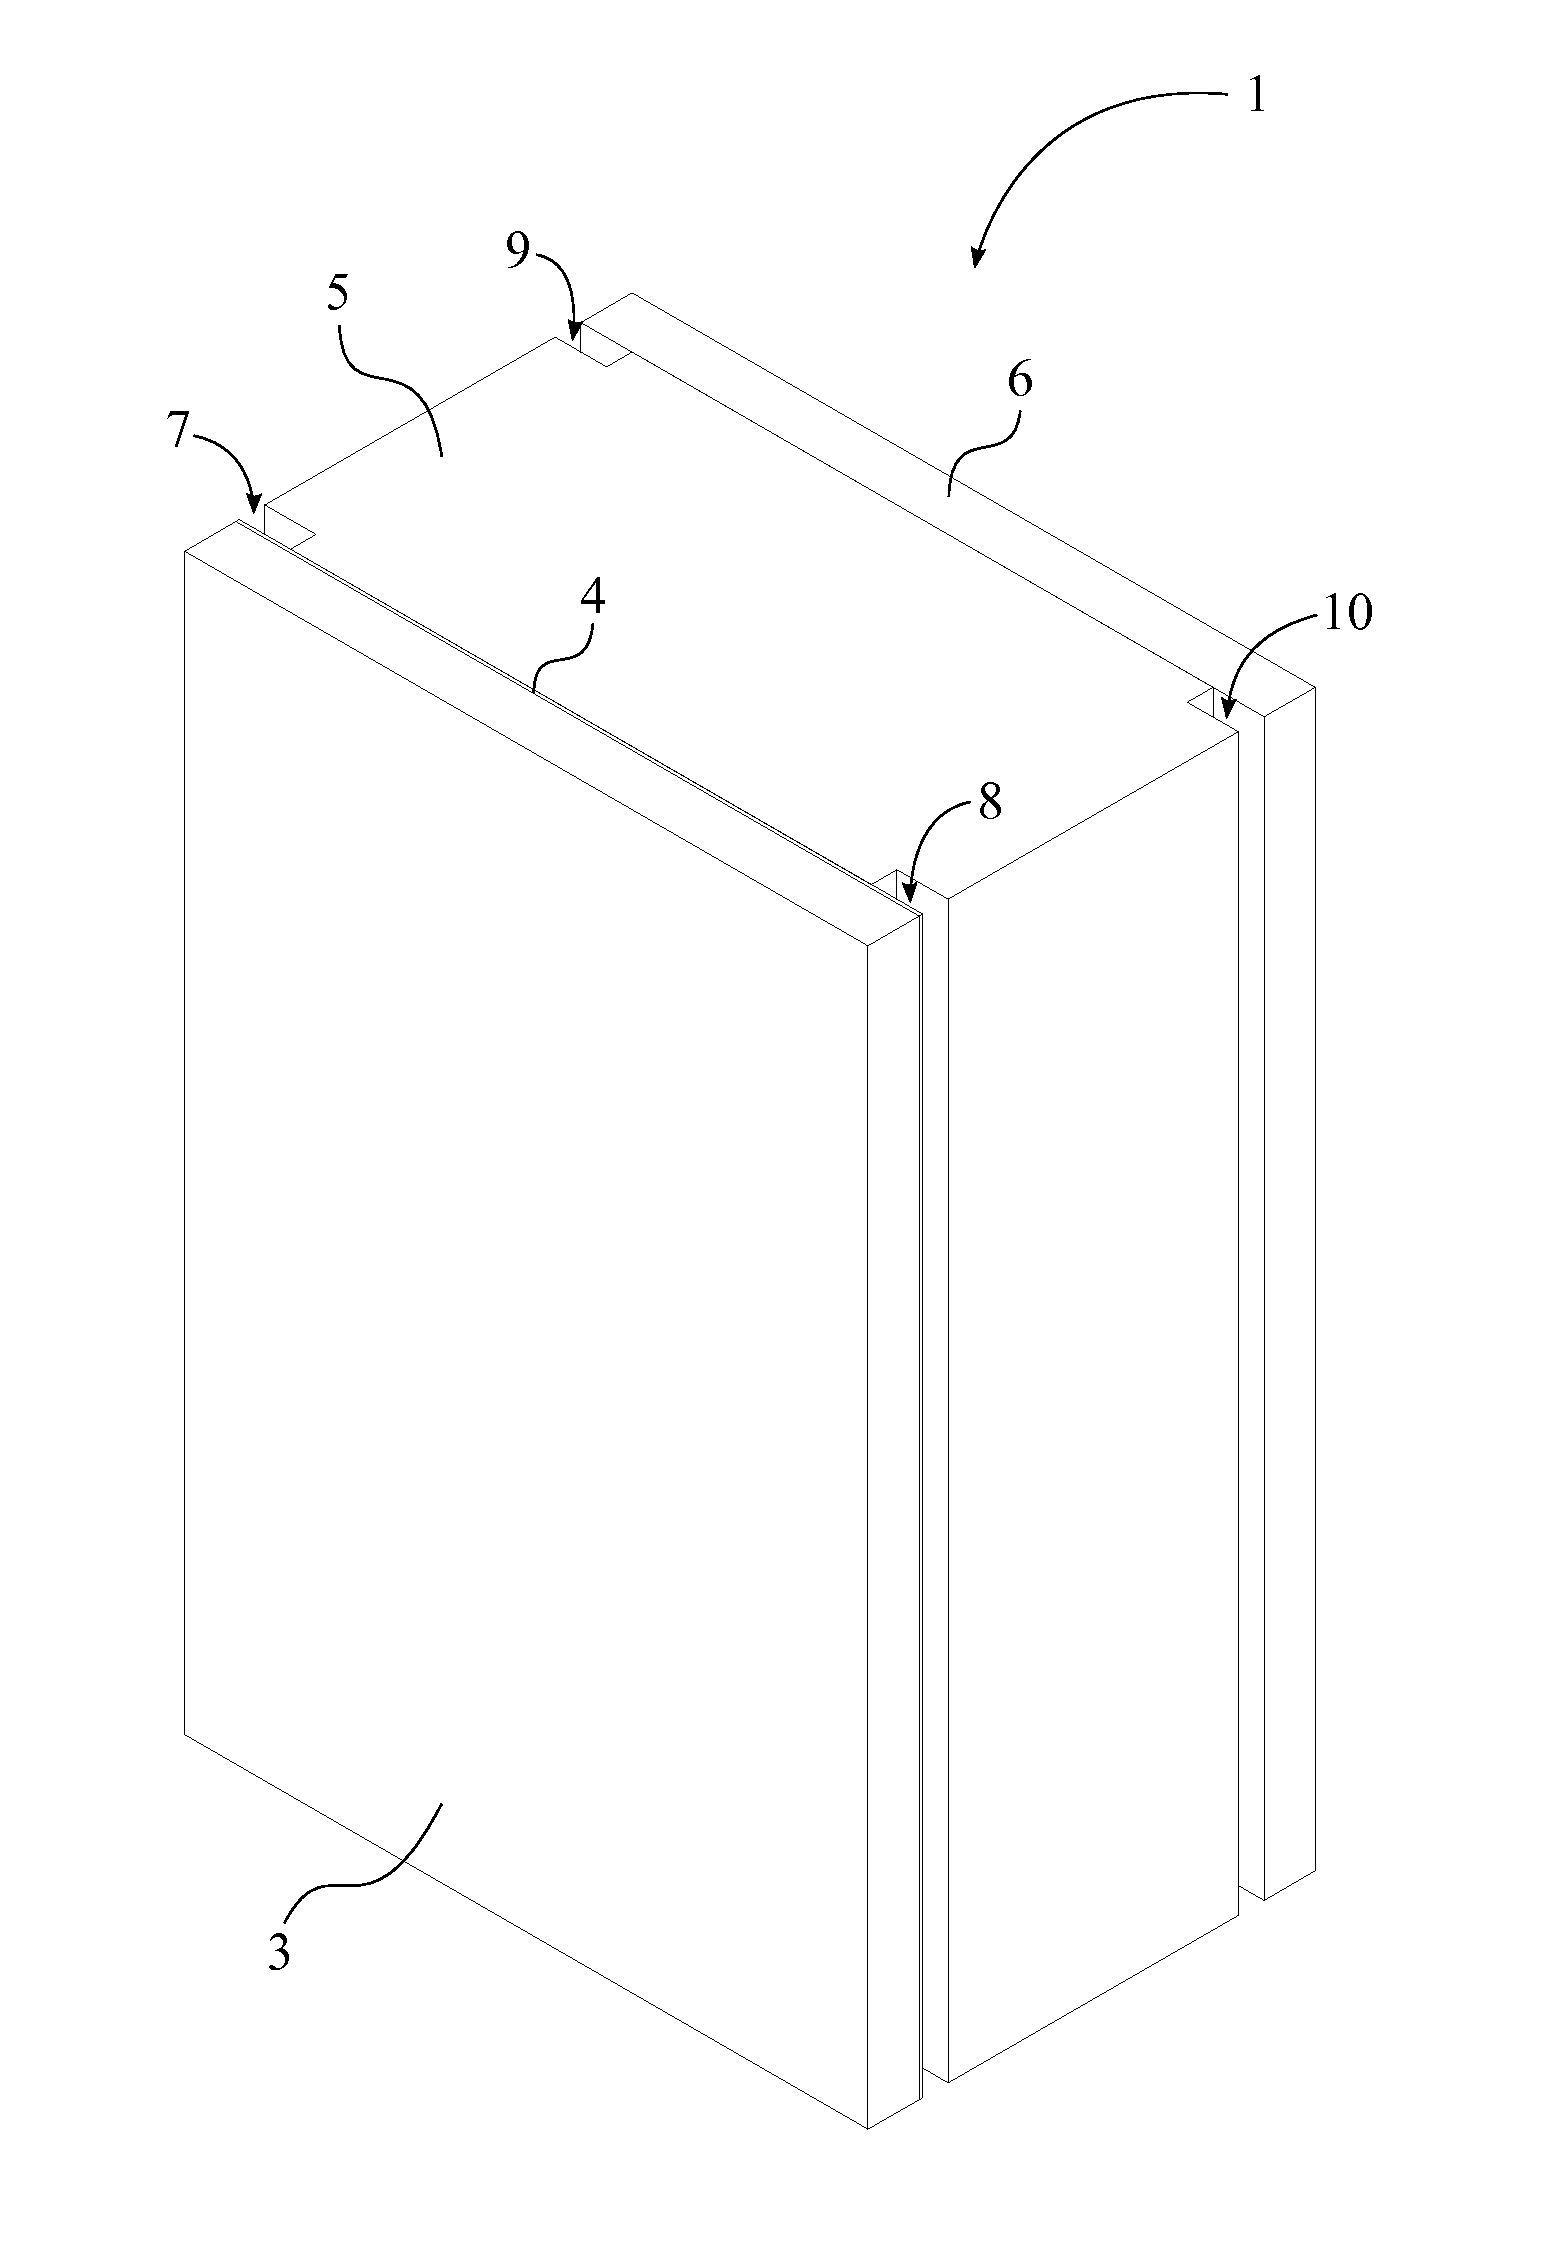 Method of Connecting Structural Insulated Building Panels through Connecting Splines